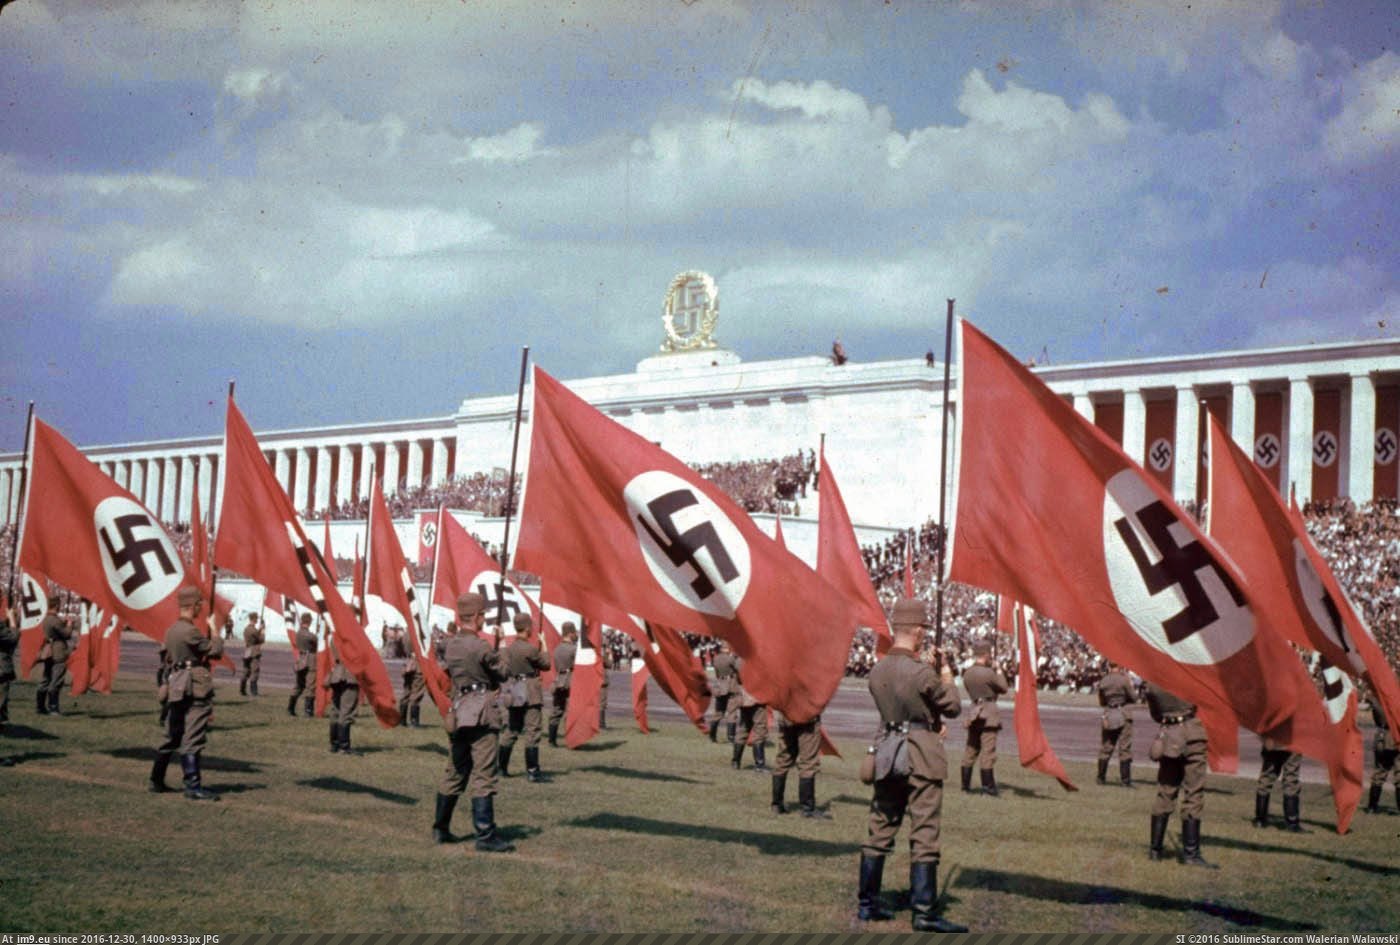 1937 Reich Party Congress, Nuremberg, Germany. (in Restored Photos of Nazi Germany)